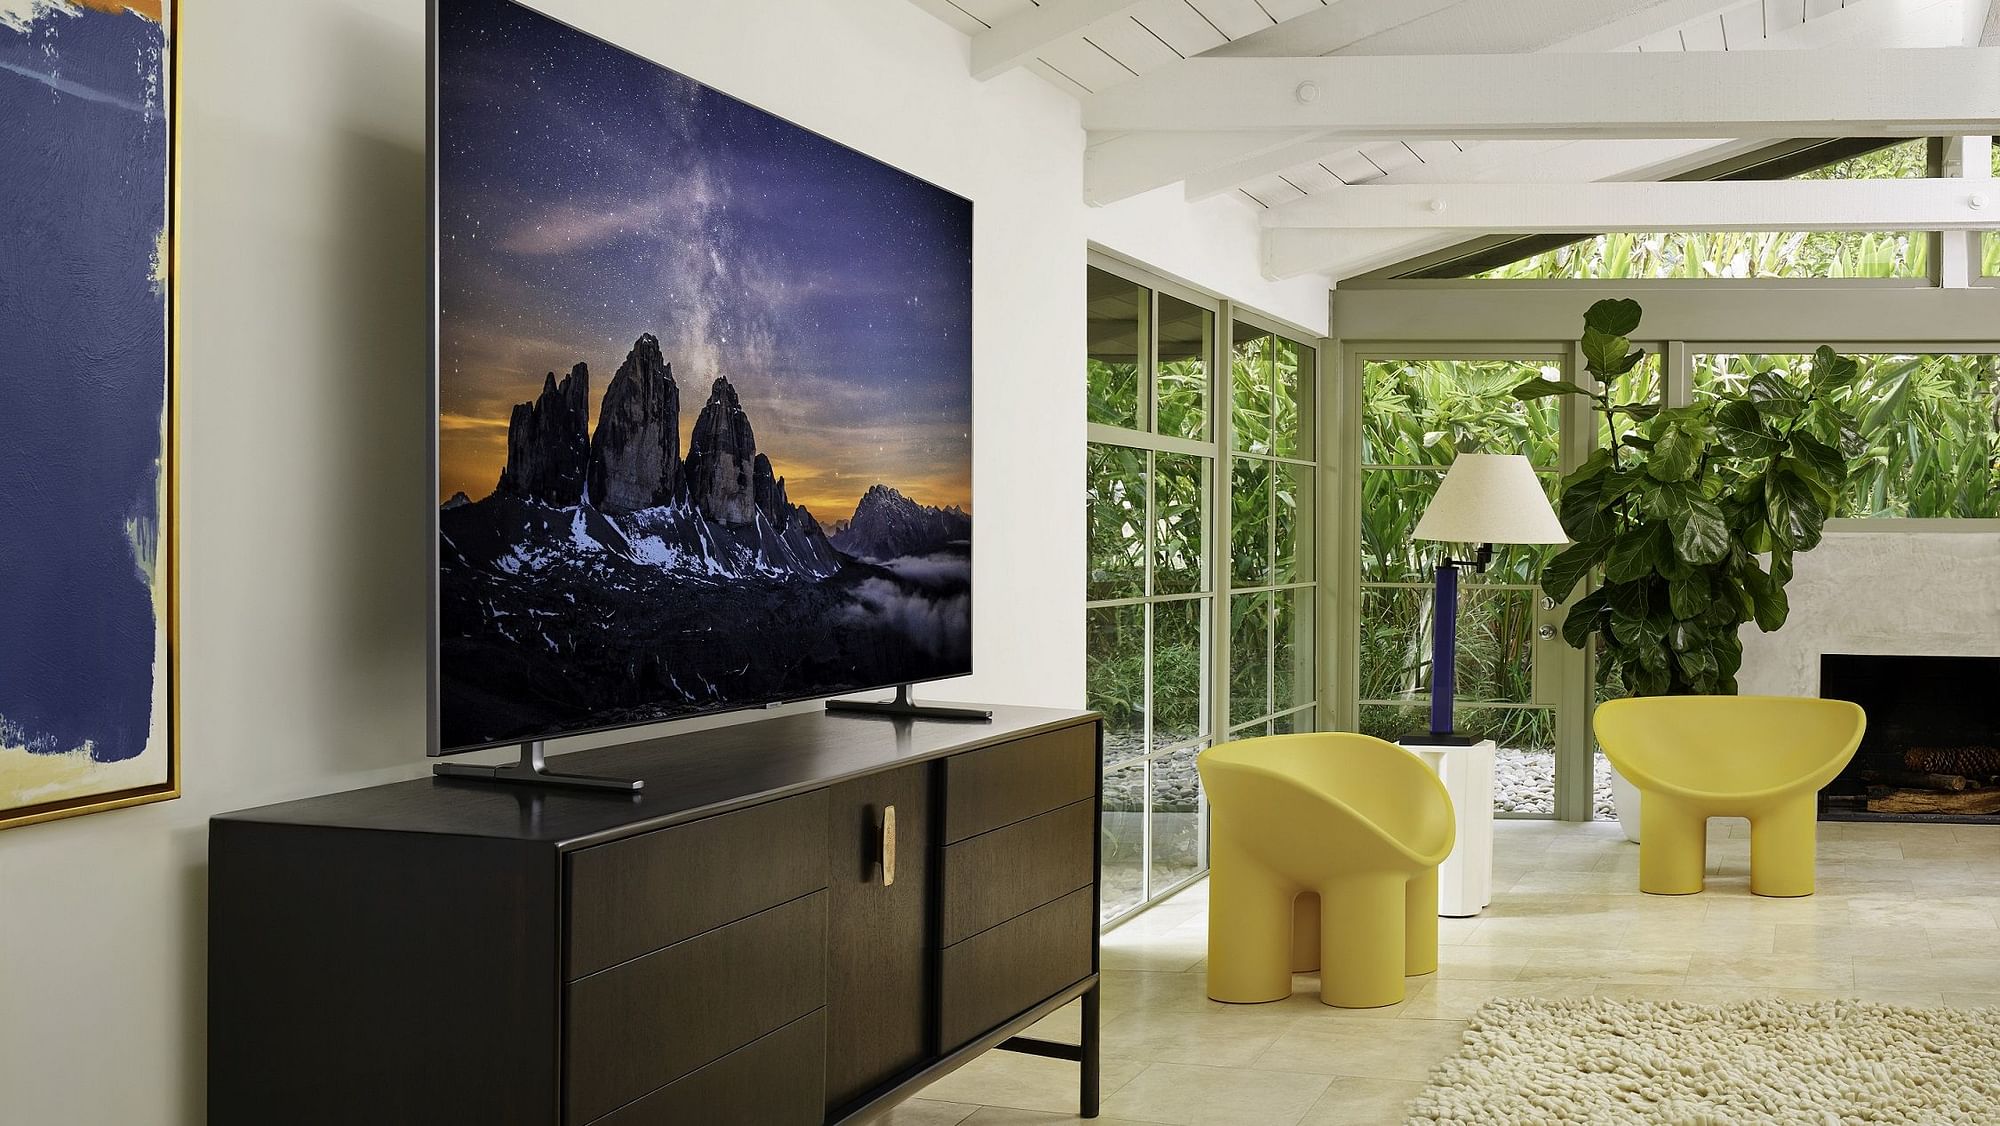 This is Samsung’s 8K TV that has been launched in India.